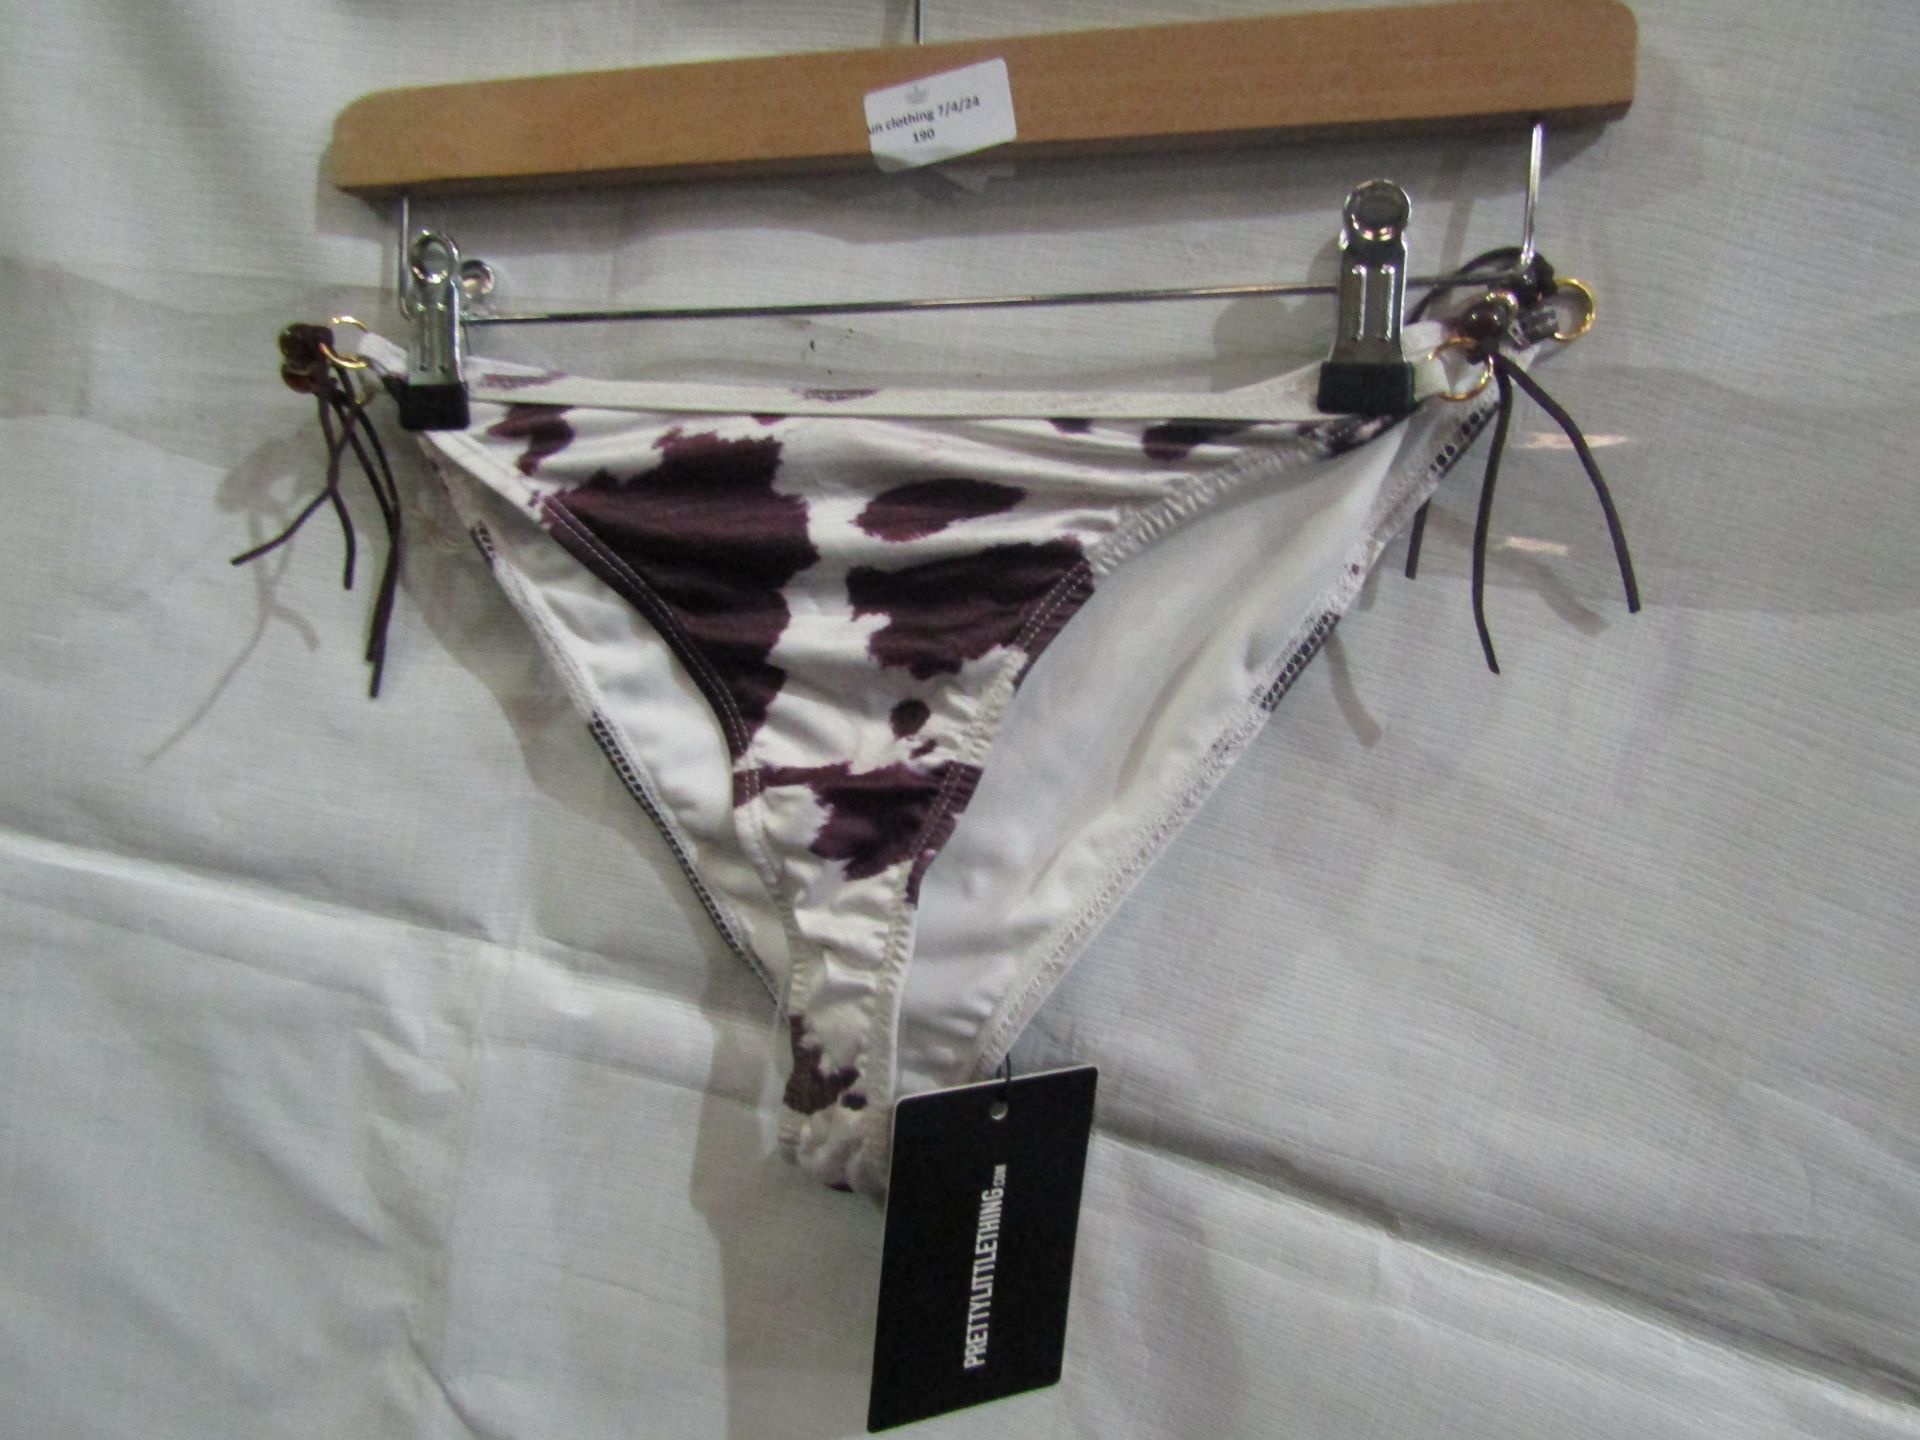 2x Pretty Little Thing Brown Cow Print Beaded Tie Bikini - Size 8, New & Packaged.